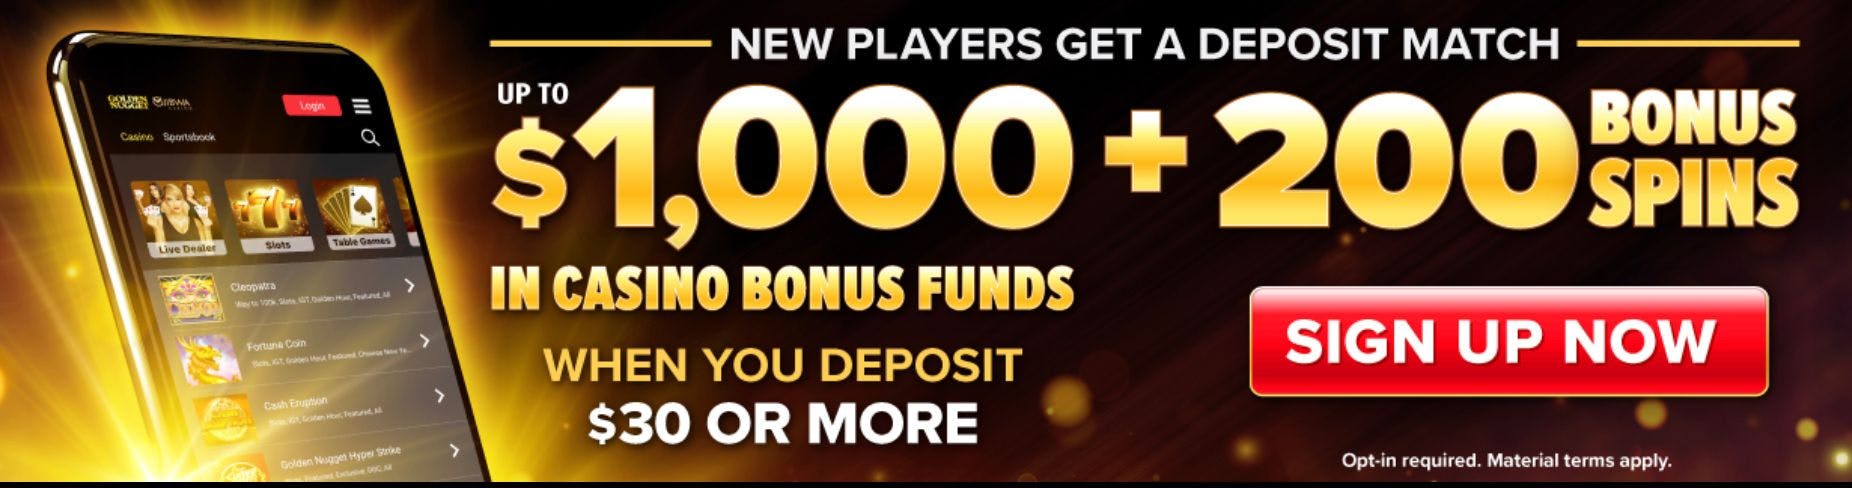 Image detailing the $1,000 matched deposit bonus plus 200 free spins on offer as a welcome bonus at Golden Nugget Casino in Michigan